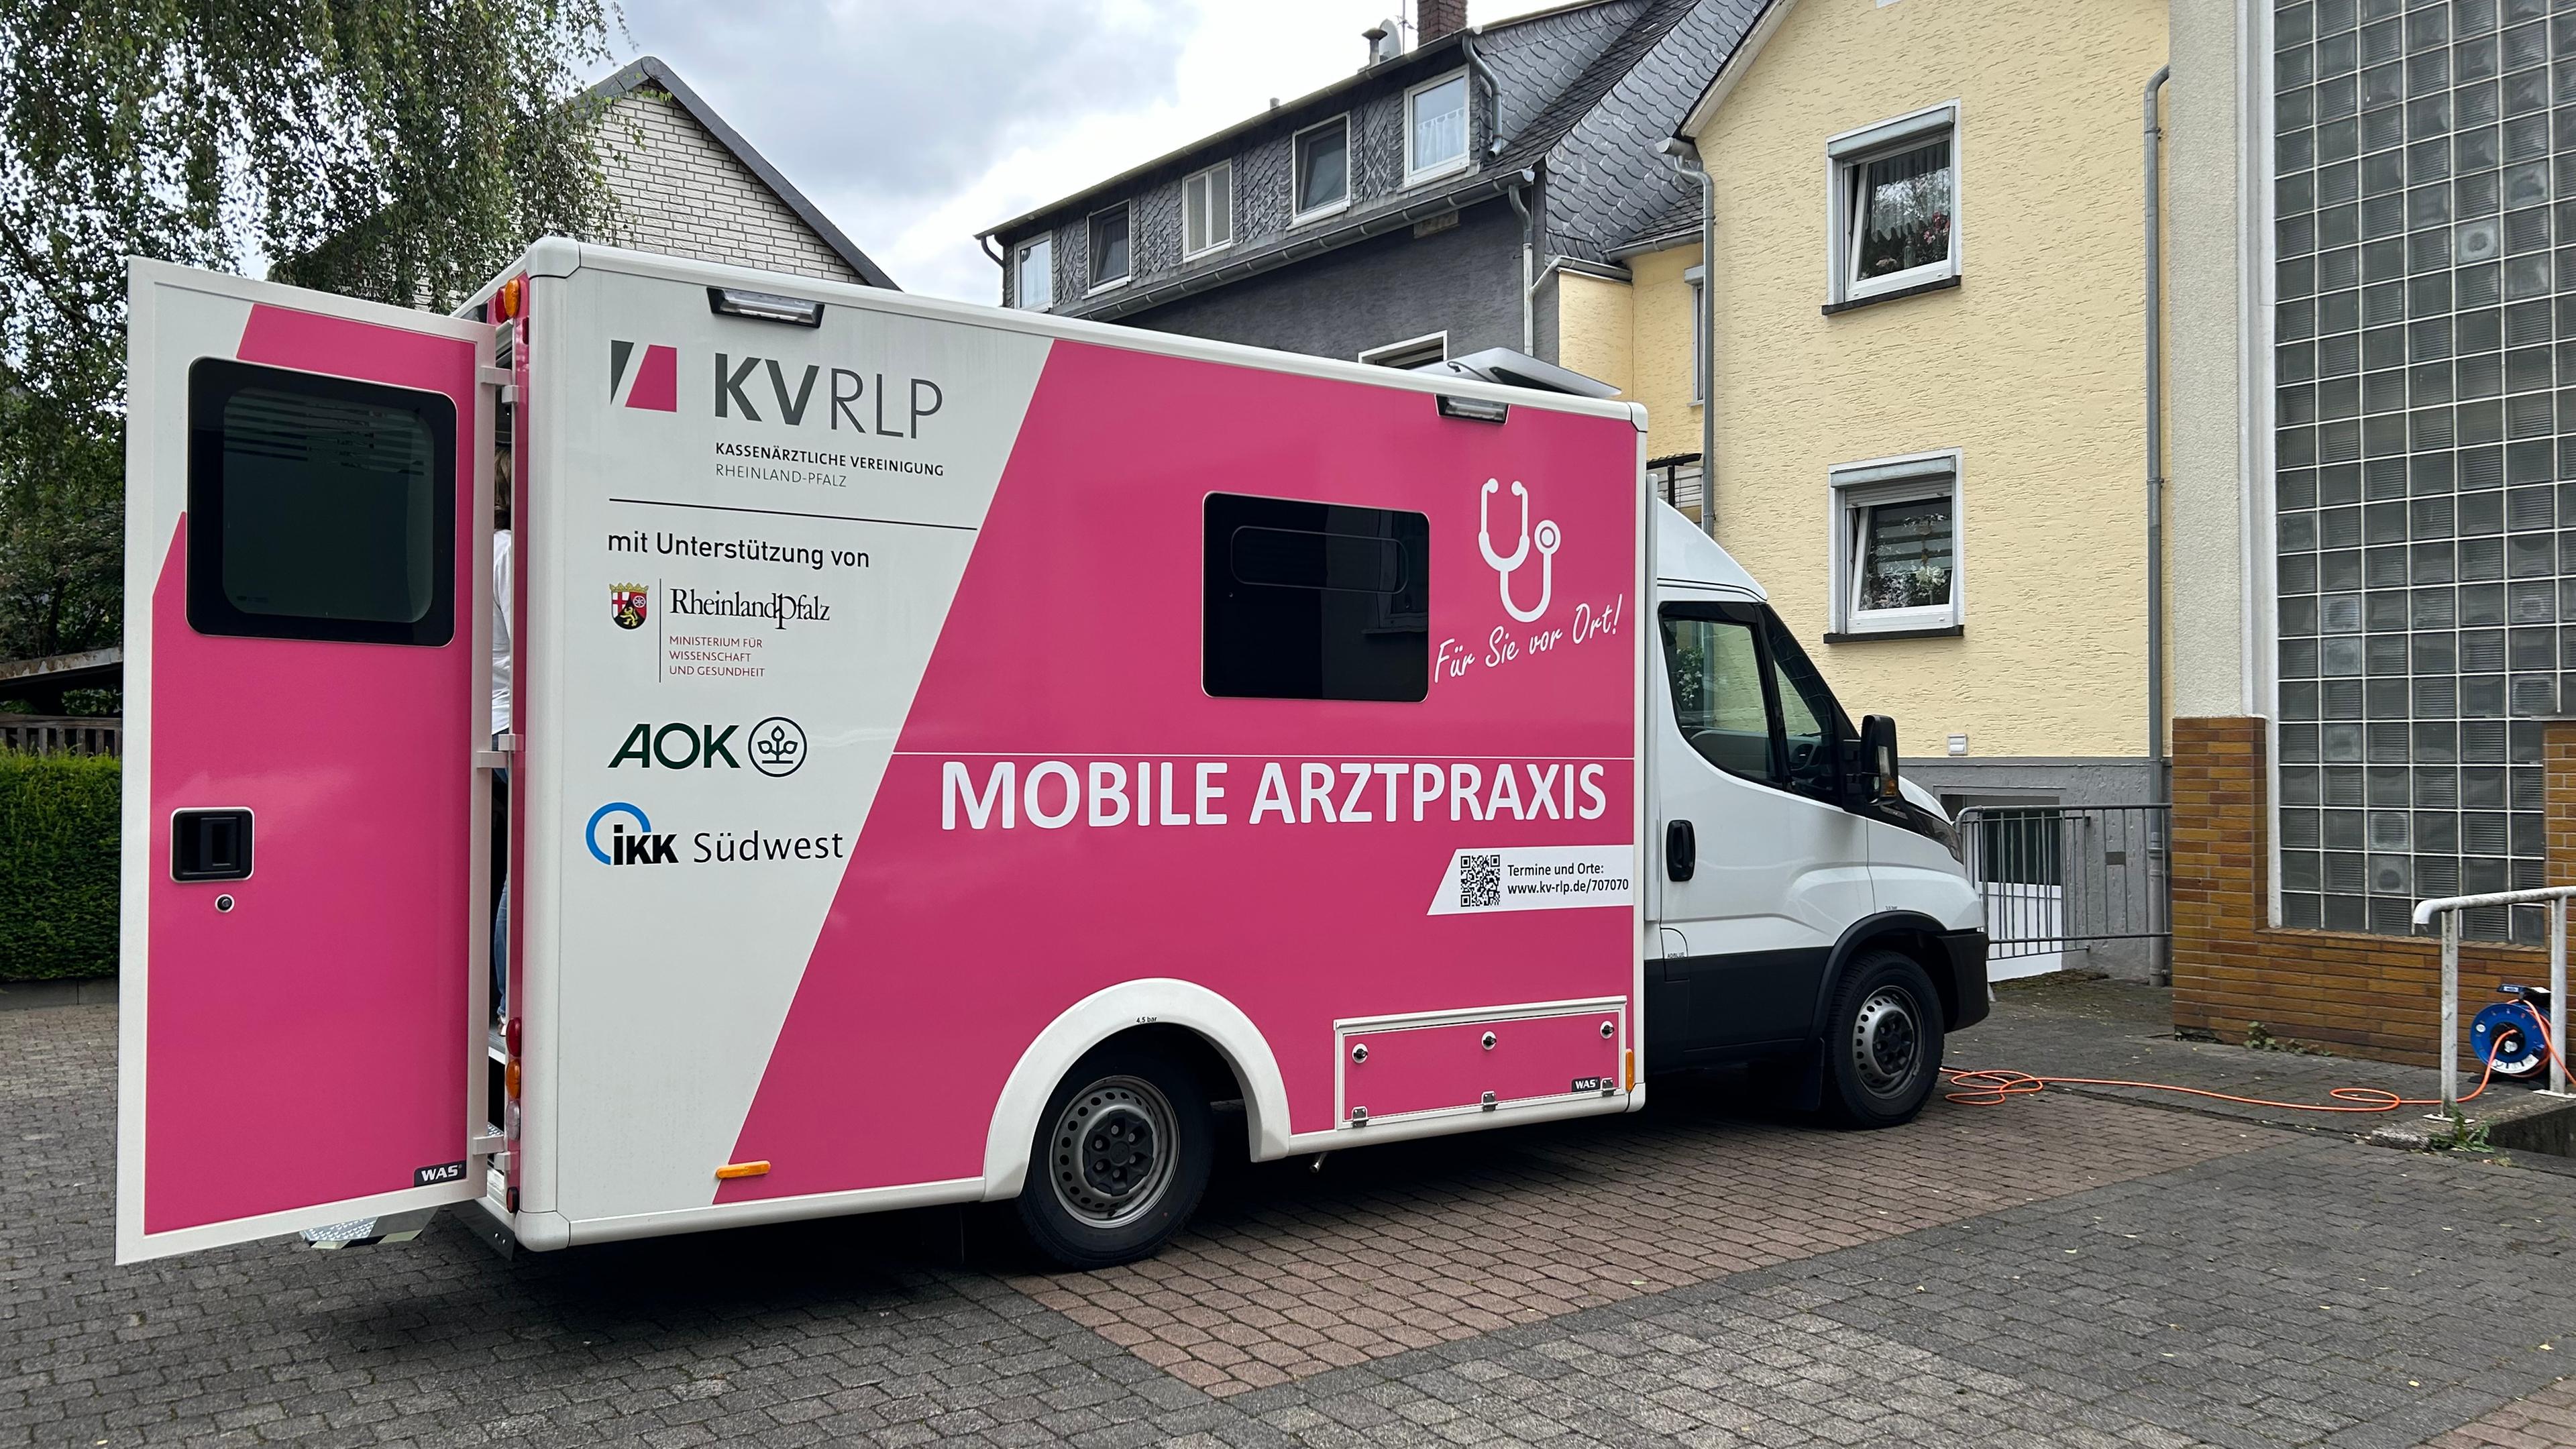 Mobile Arztpraxis